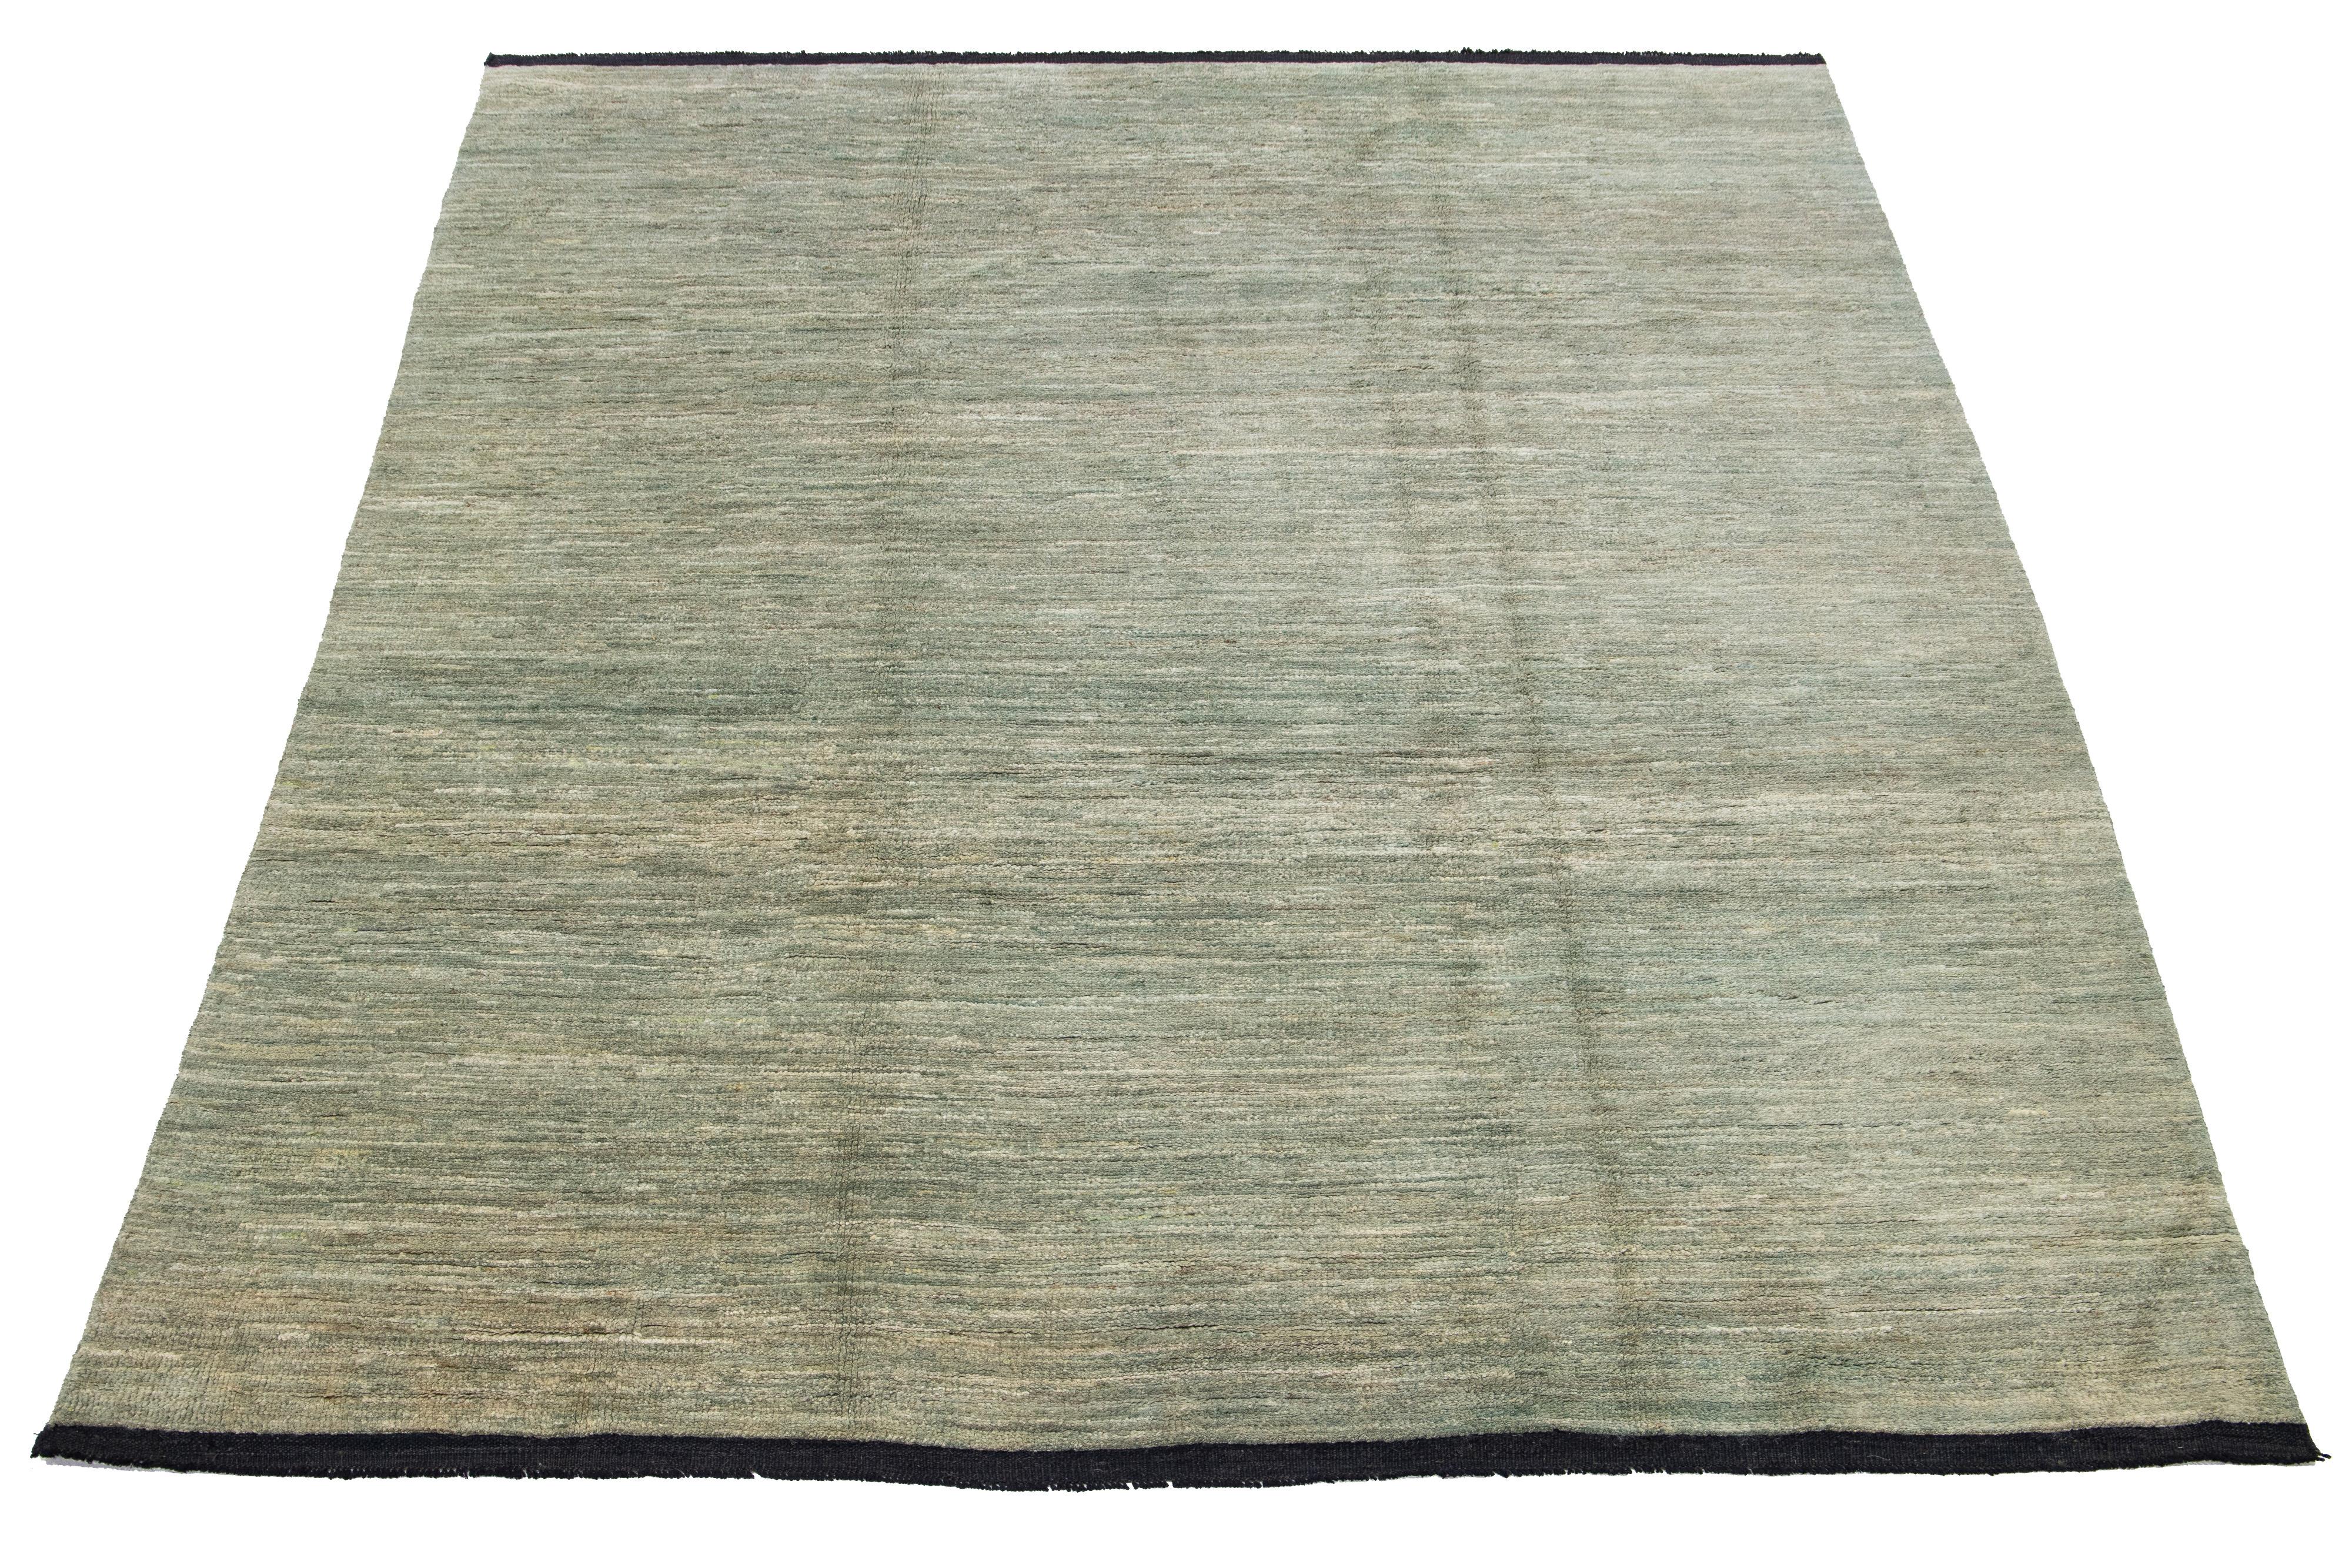 This handcrafted wool rug, designed in the Gabbeh style, showcases a solid design accentuated by green shades against a vibrant beige background.

This rug measures 7'9